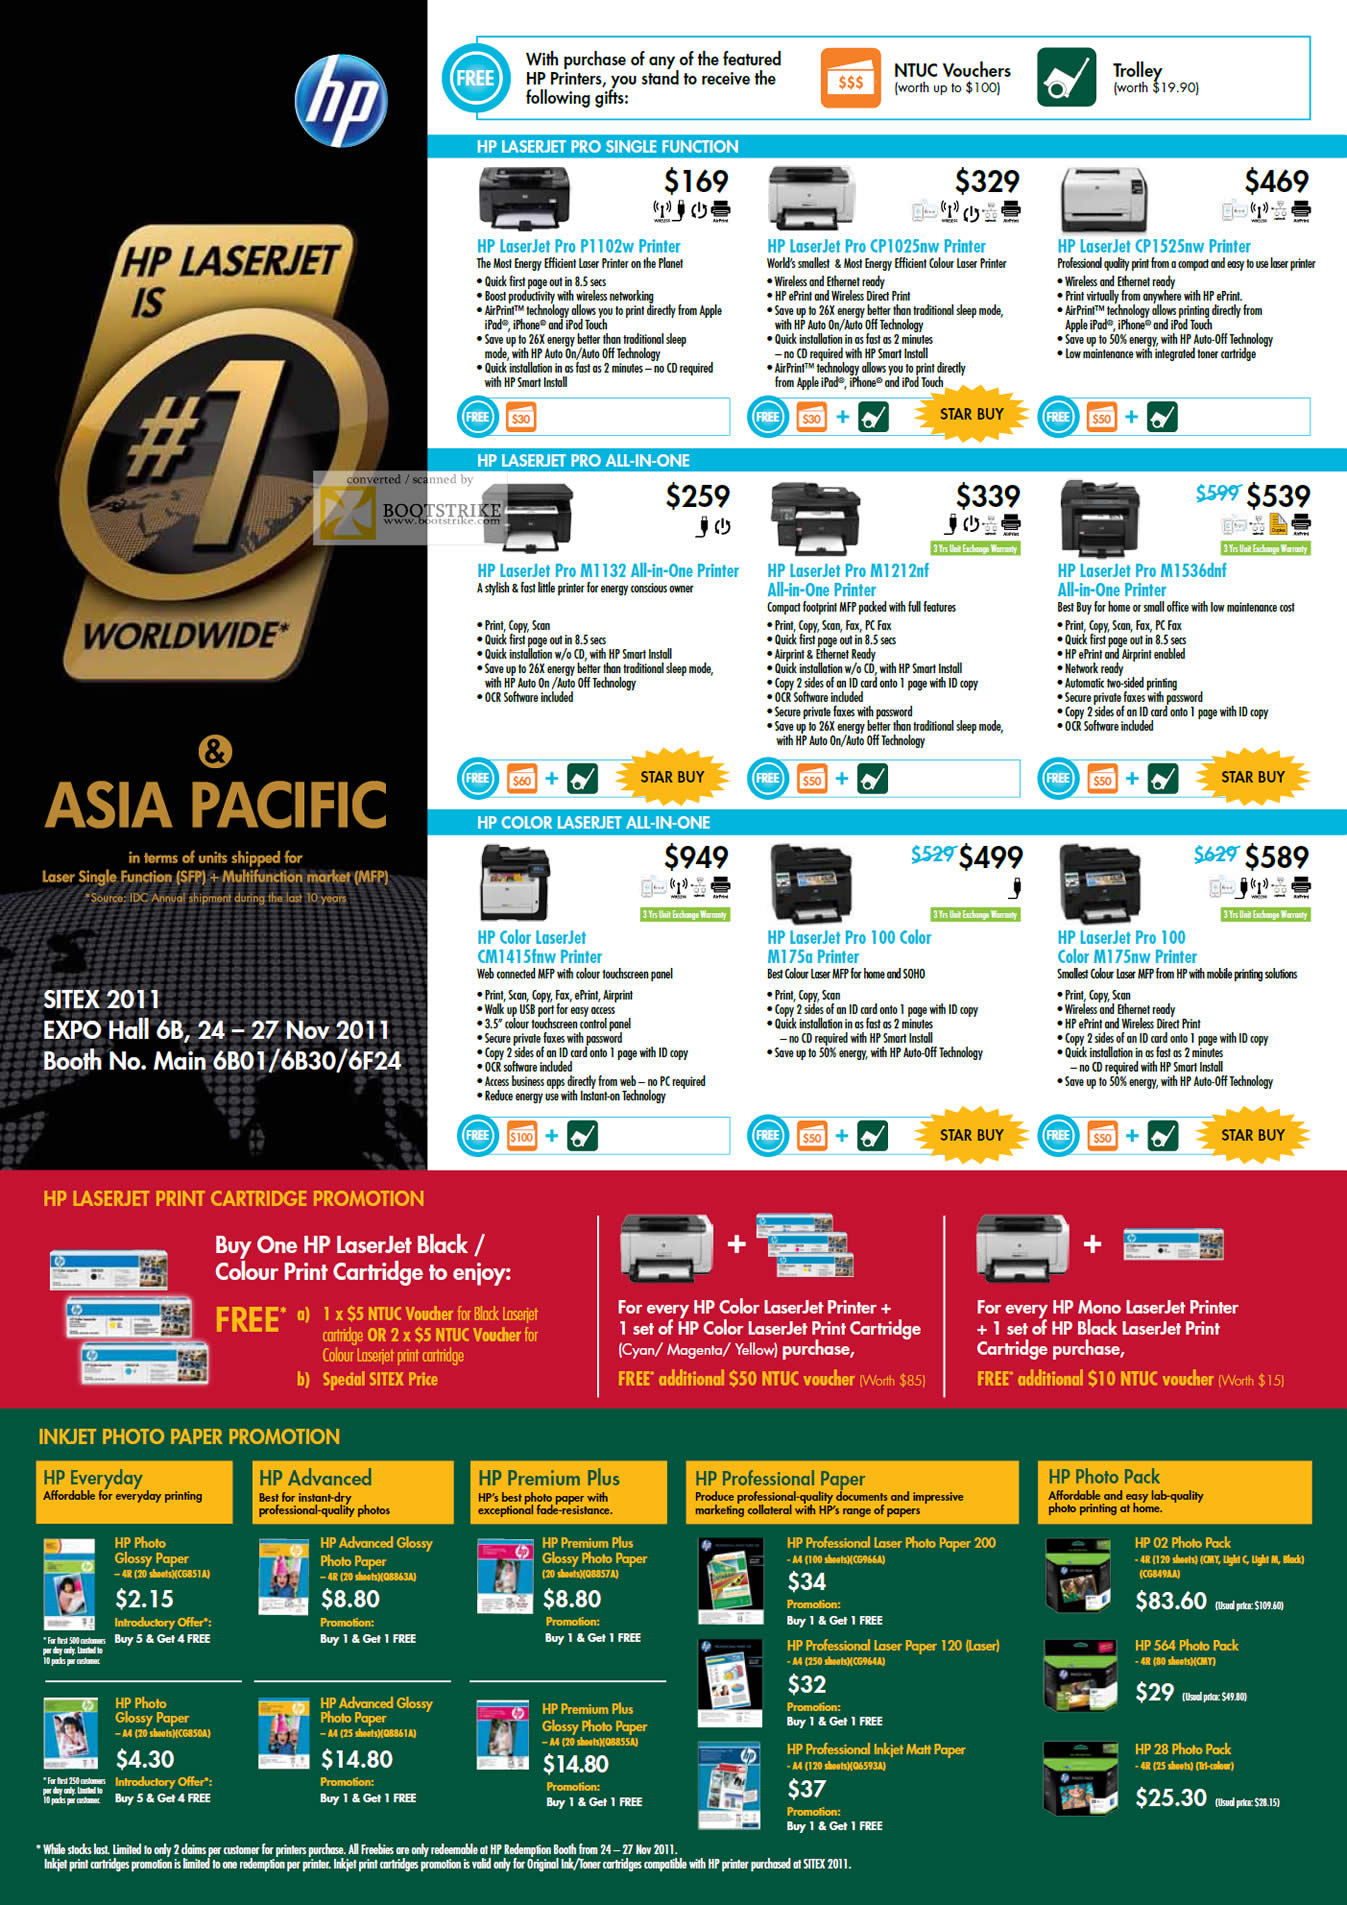 SITEX 2011 price list image brochure of HP Printers Laser Laserjet Pro P1102w, CP1025nw, CP1525nw, M1132, M1212nf, M1536dnf, CM1415fnw, Pro 100 M175a, M175nw, Inkjet Photo Paper